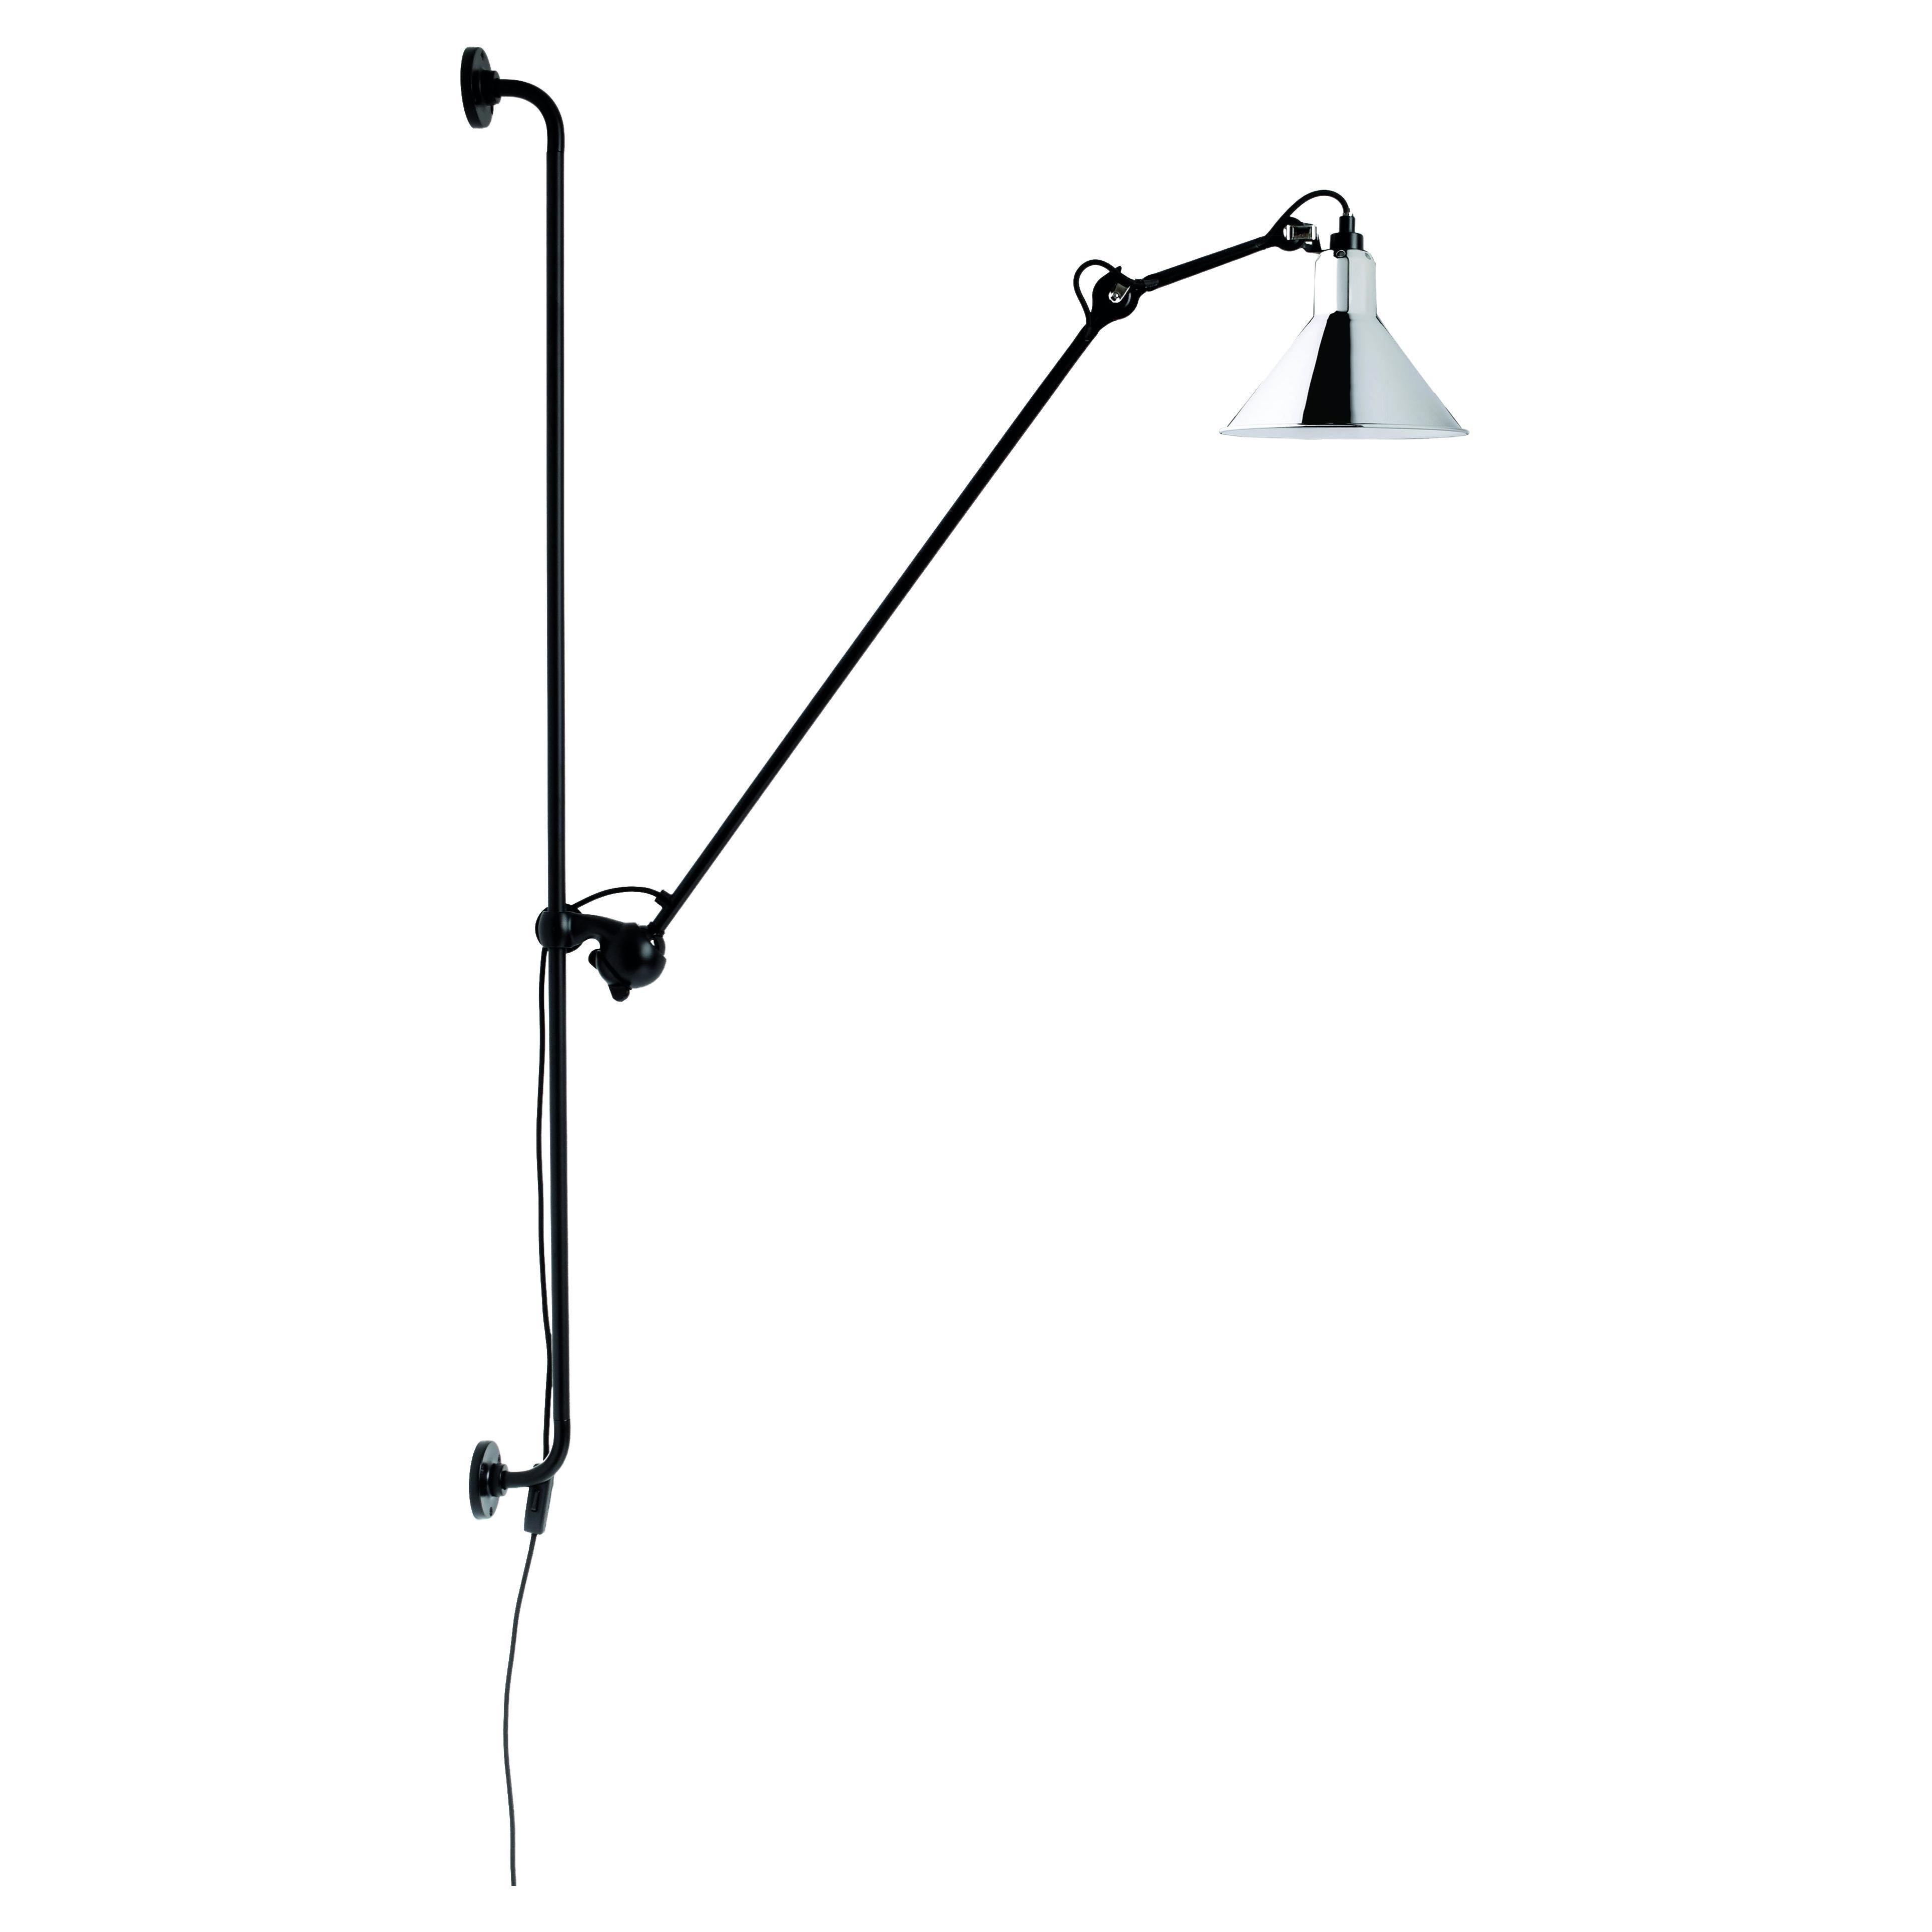 DCW Editions La Lampe Gras N°214 Conic Wall Lamp in Black Arm and Chrome Shade For Sale